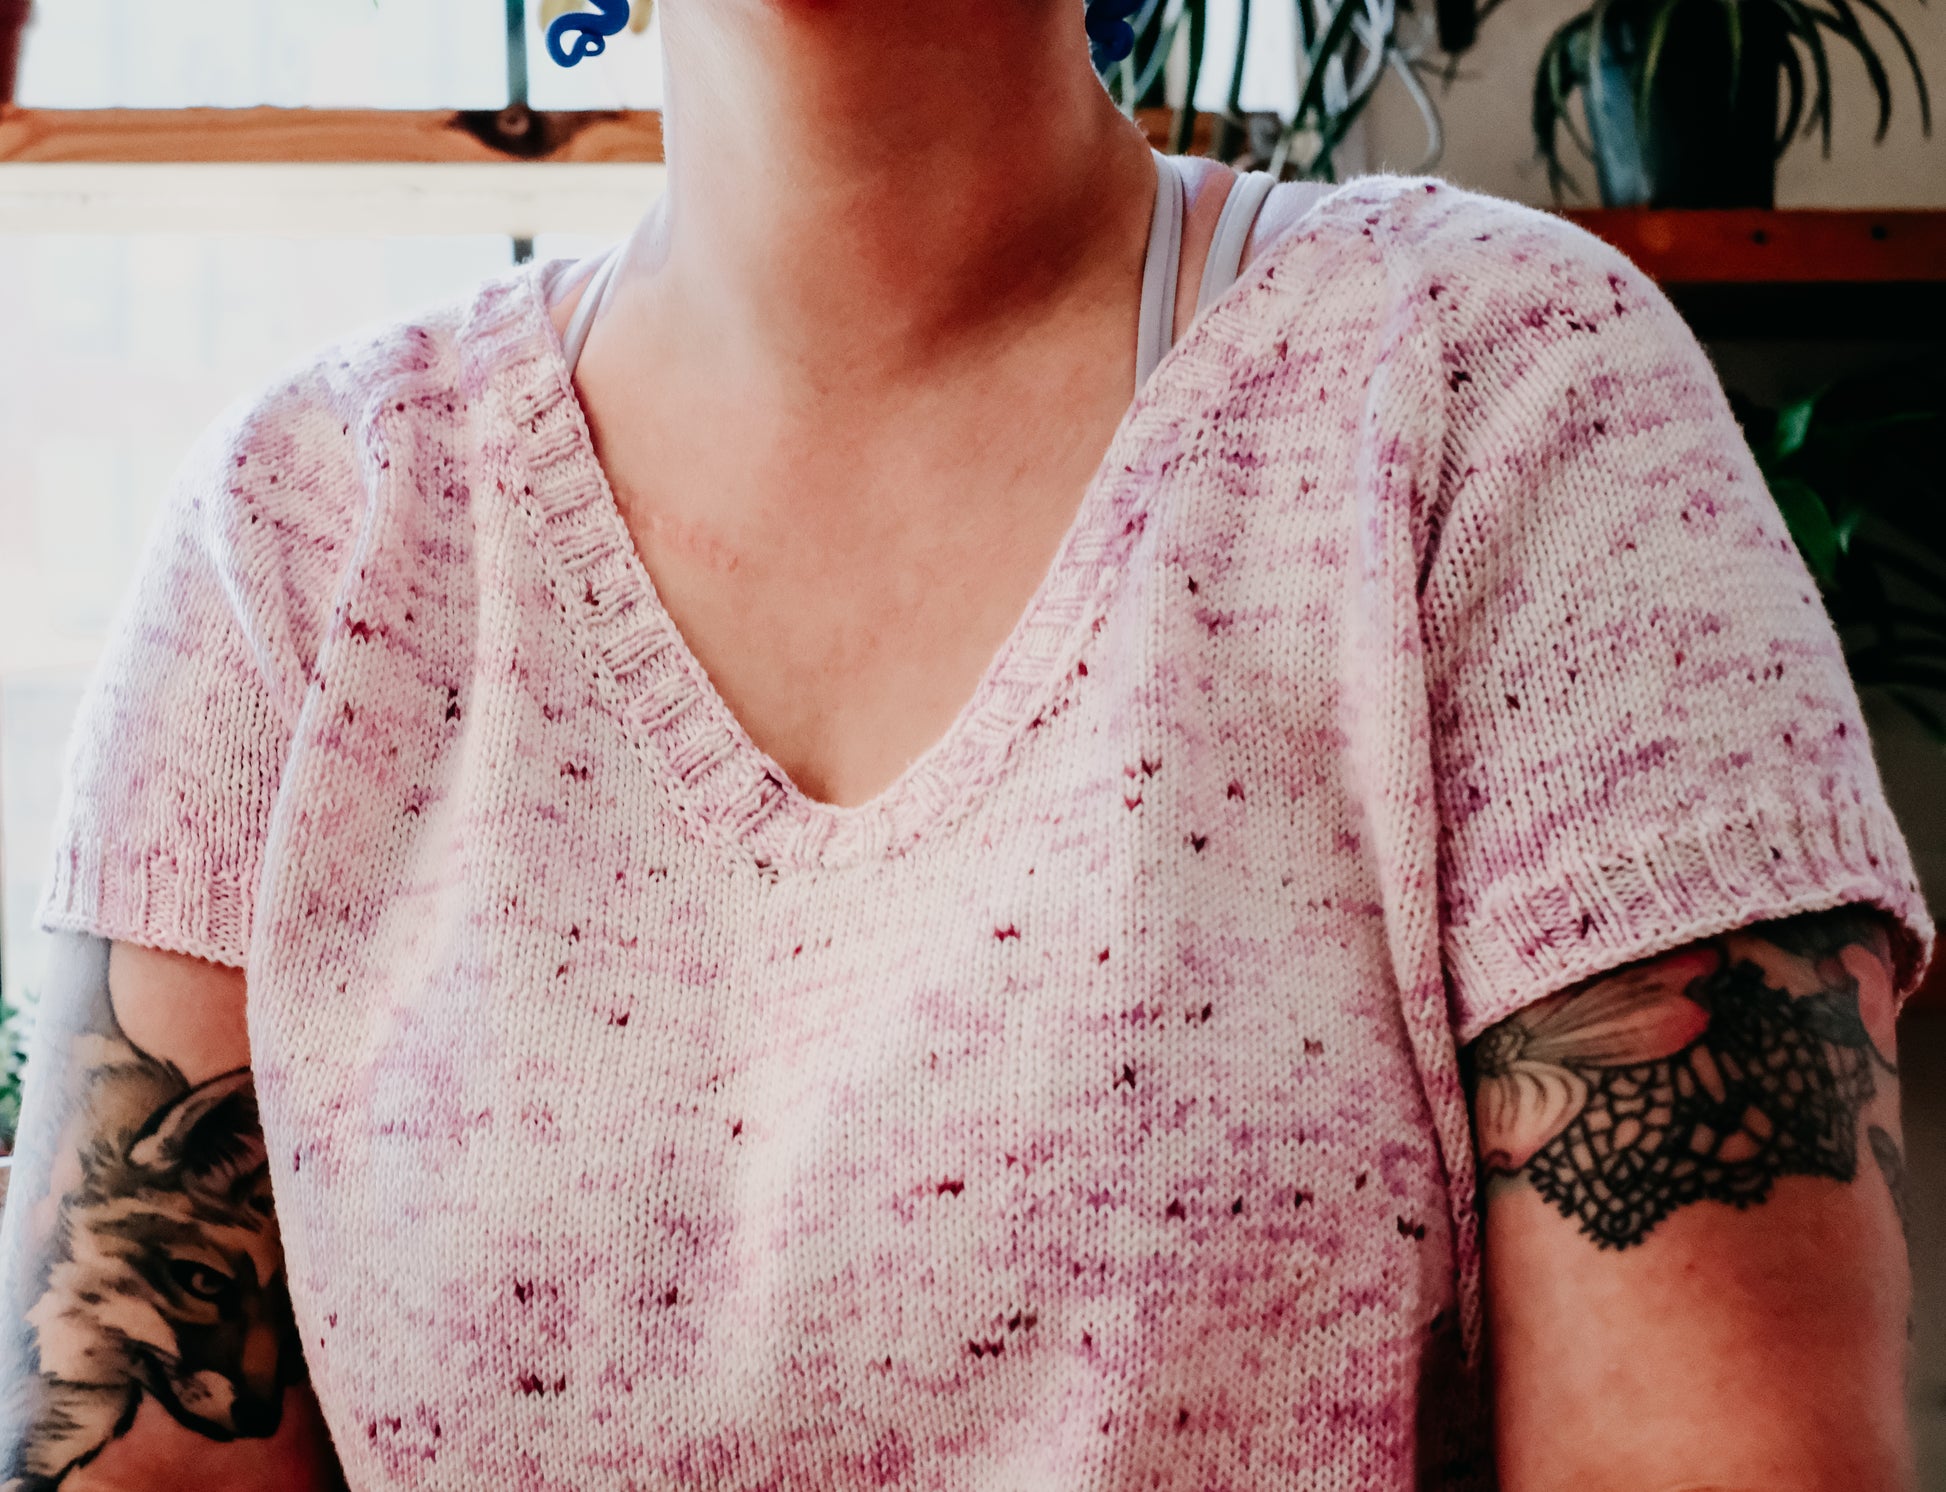 Seen close up, Jen wears a light pink, speckled tee, knit with a gentle V-neck. Houseplants can be seen in the background.